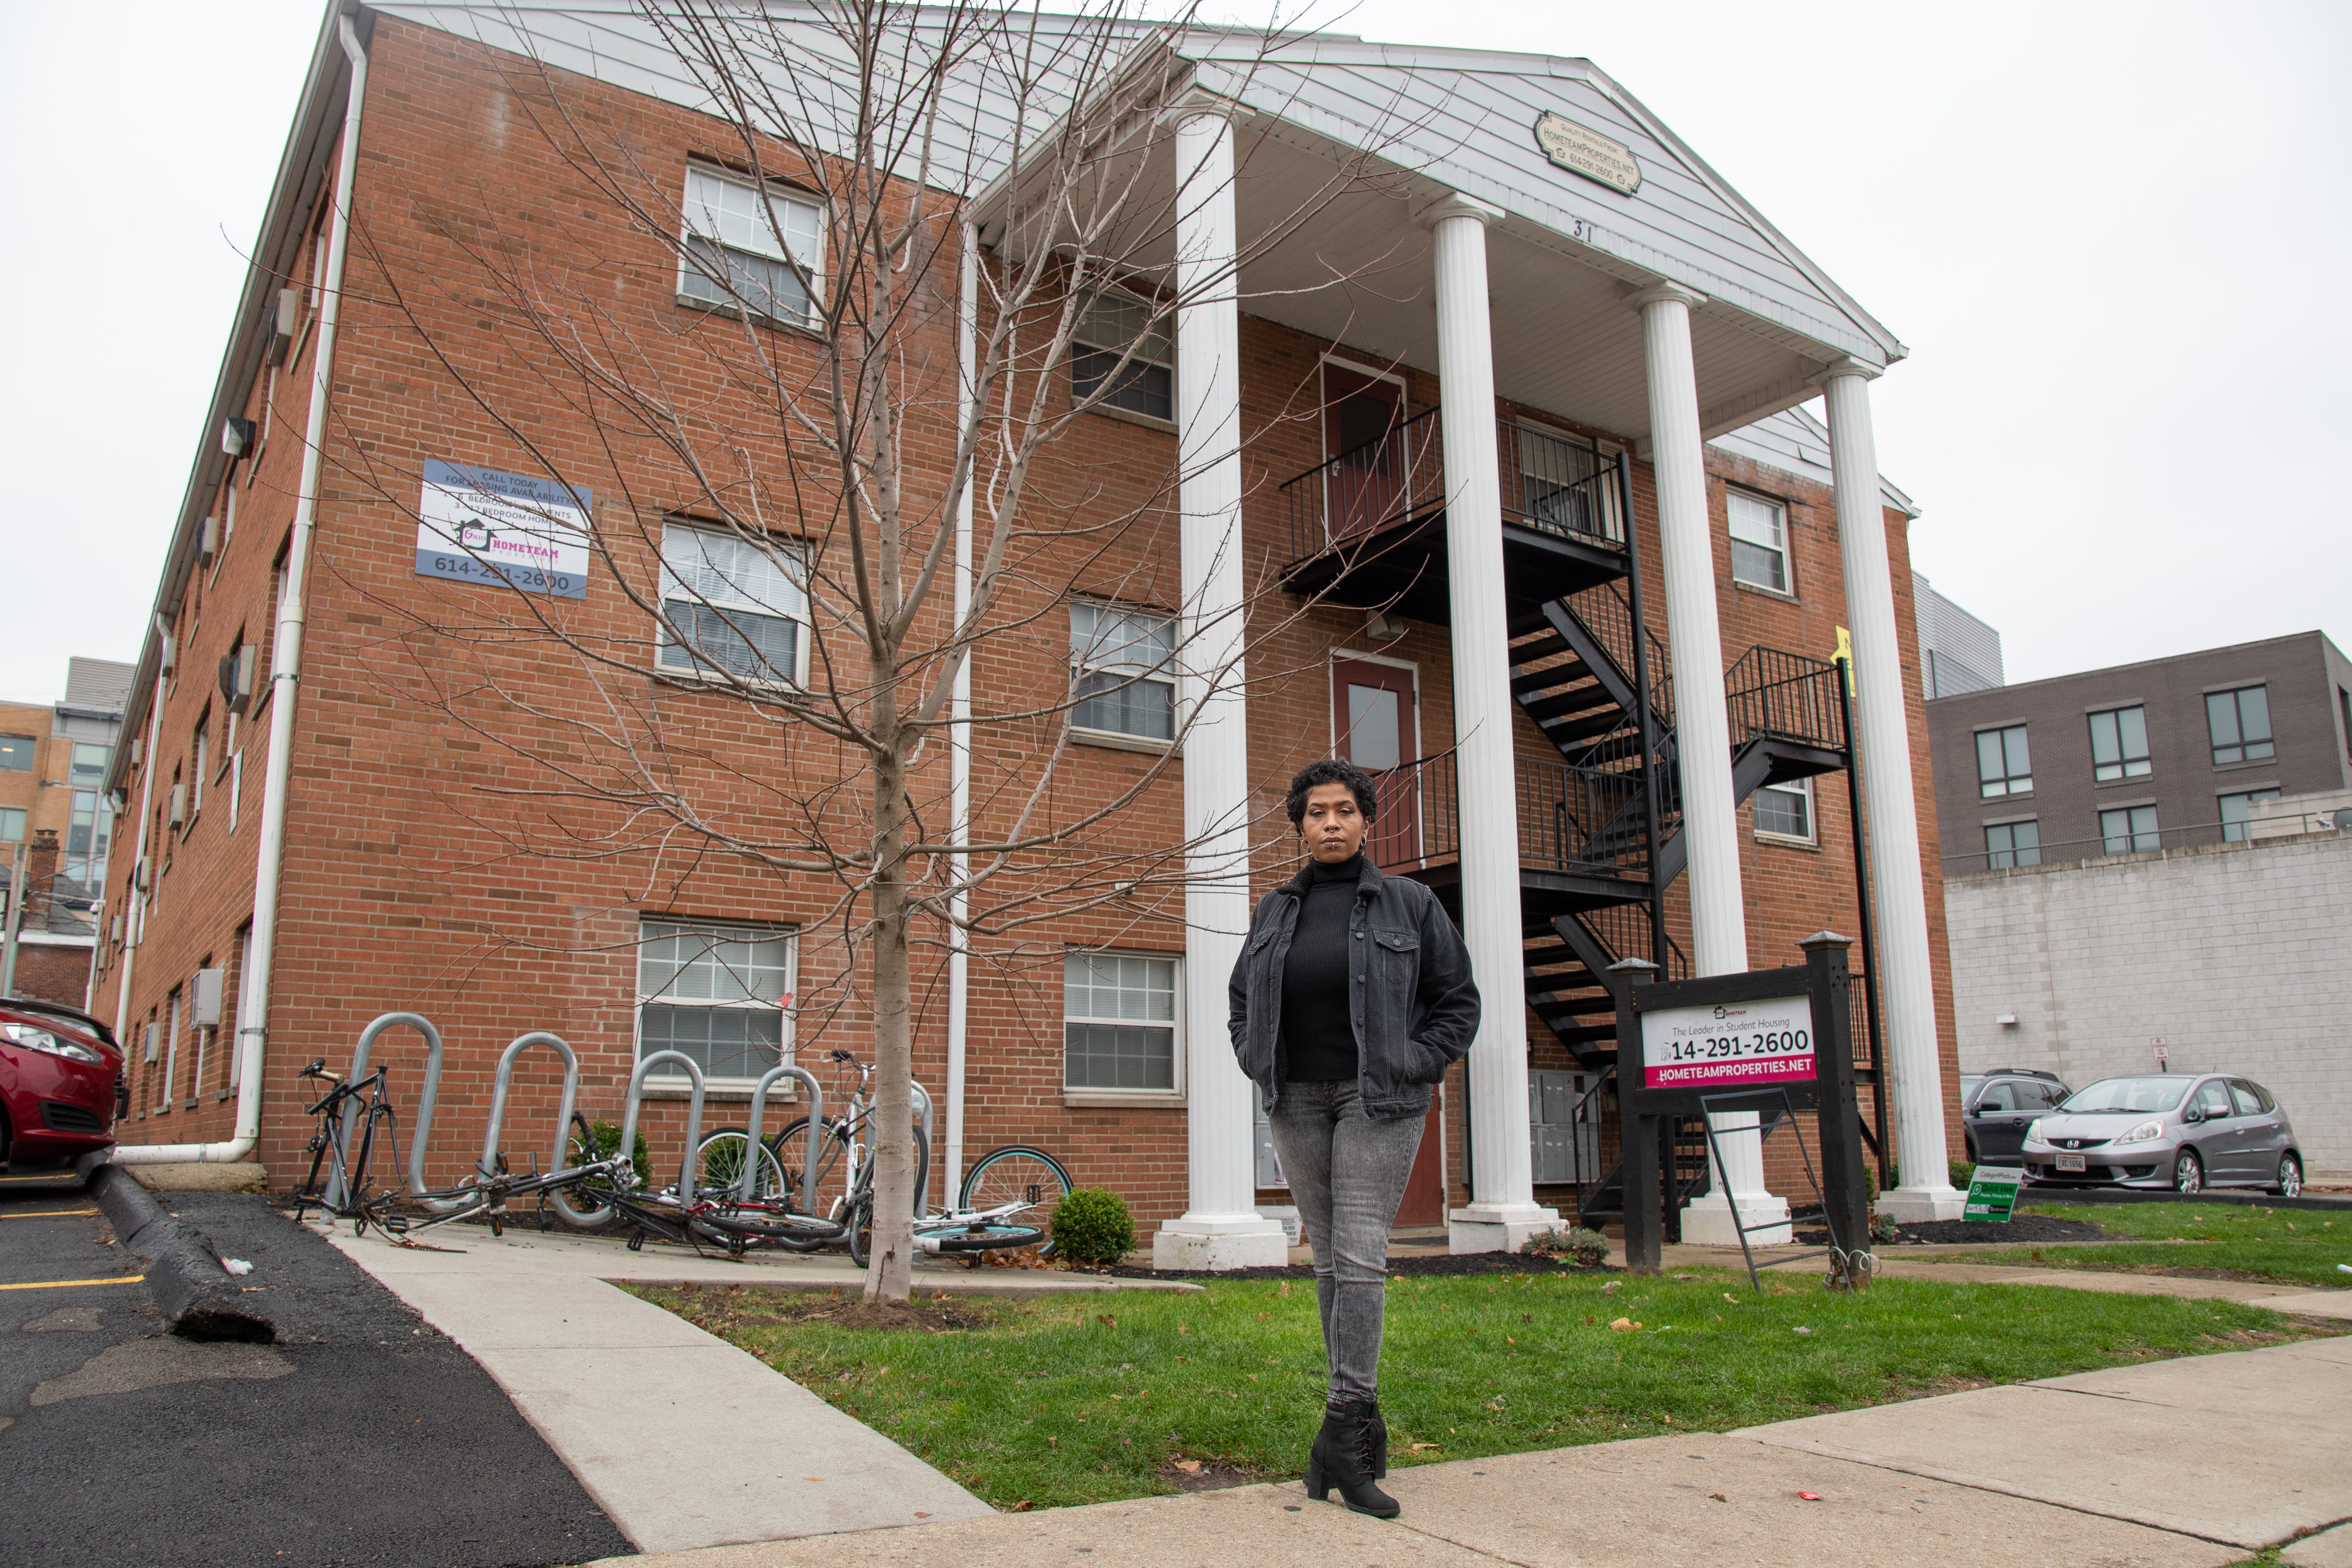 A Black woman stands in front of a brick apartment building